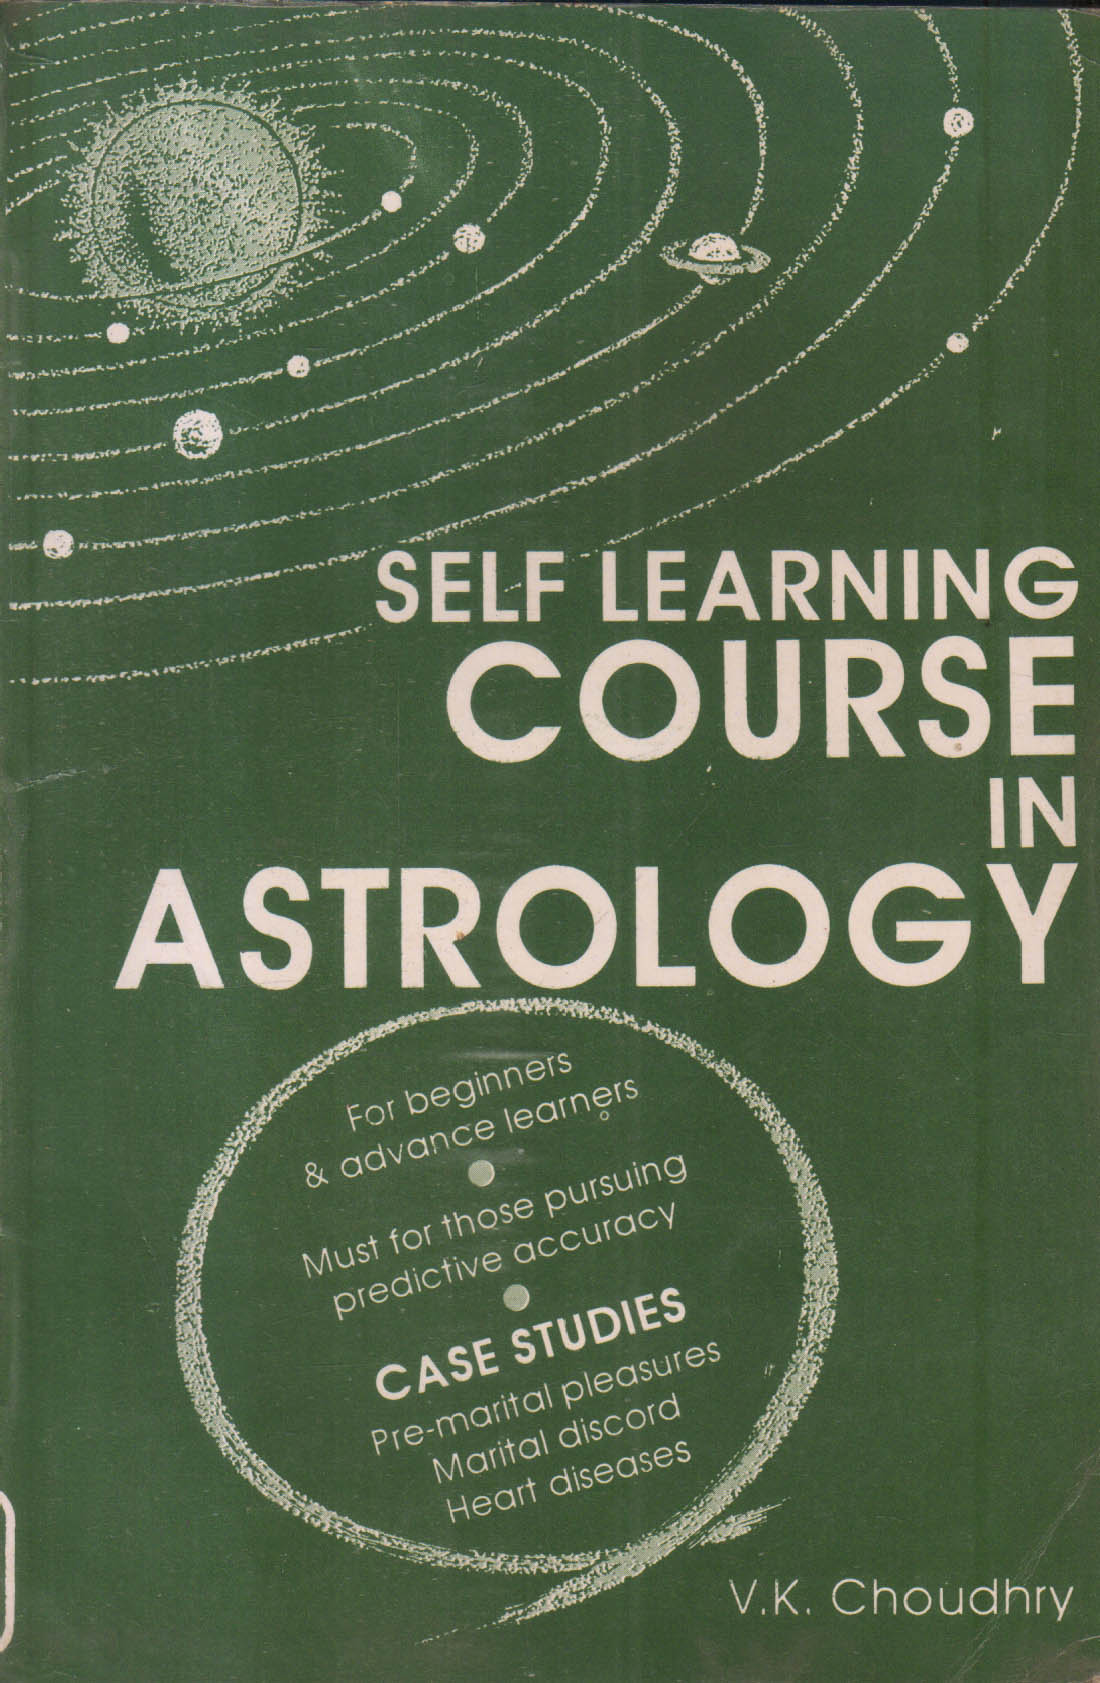 Self Learning Course in Astrology book at Best Book Centre.